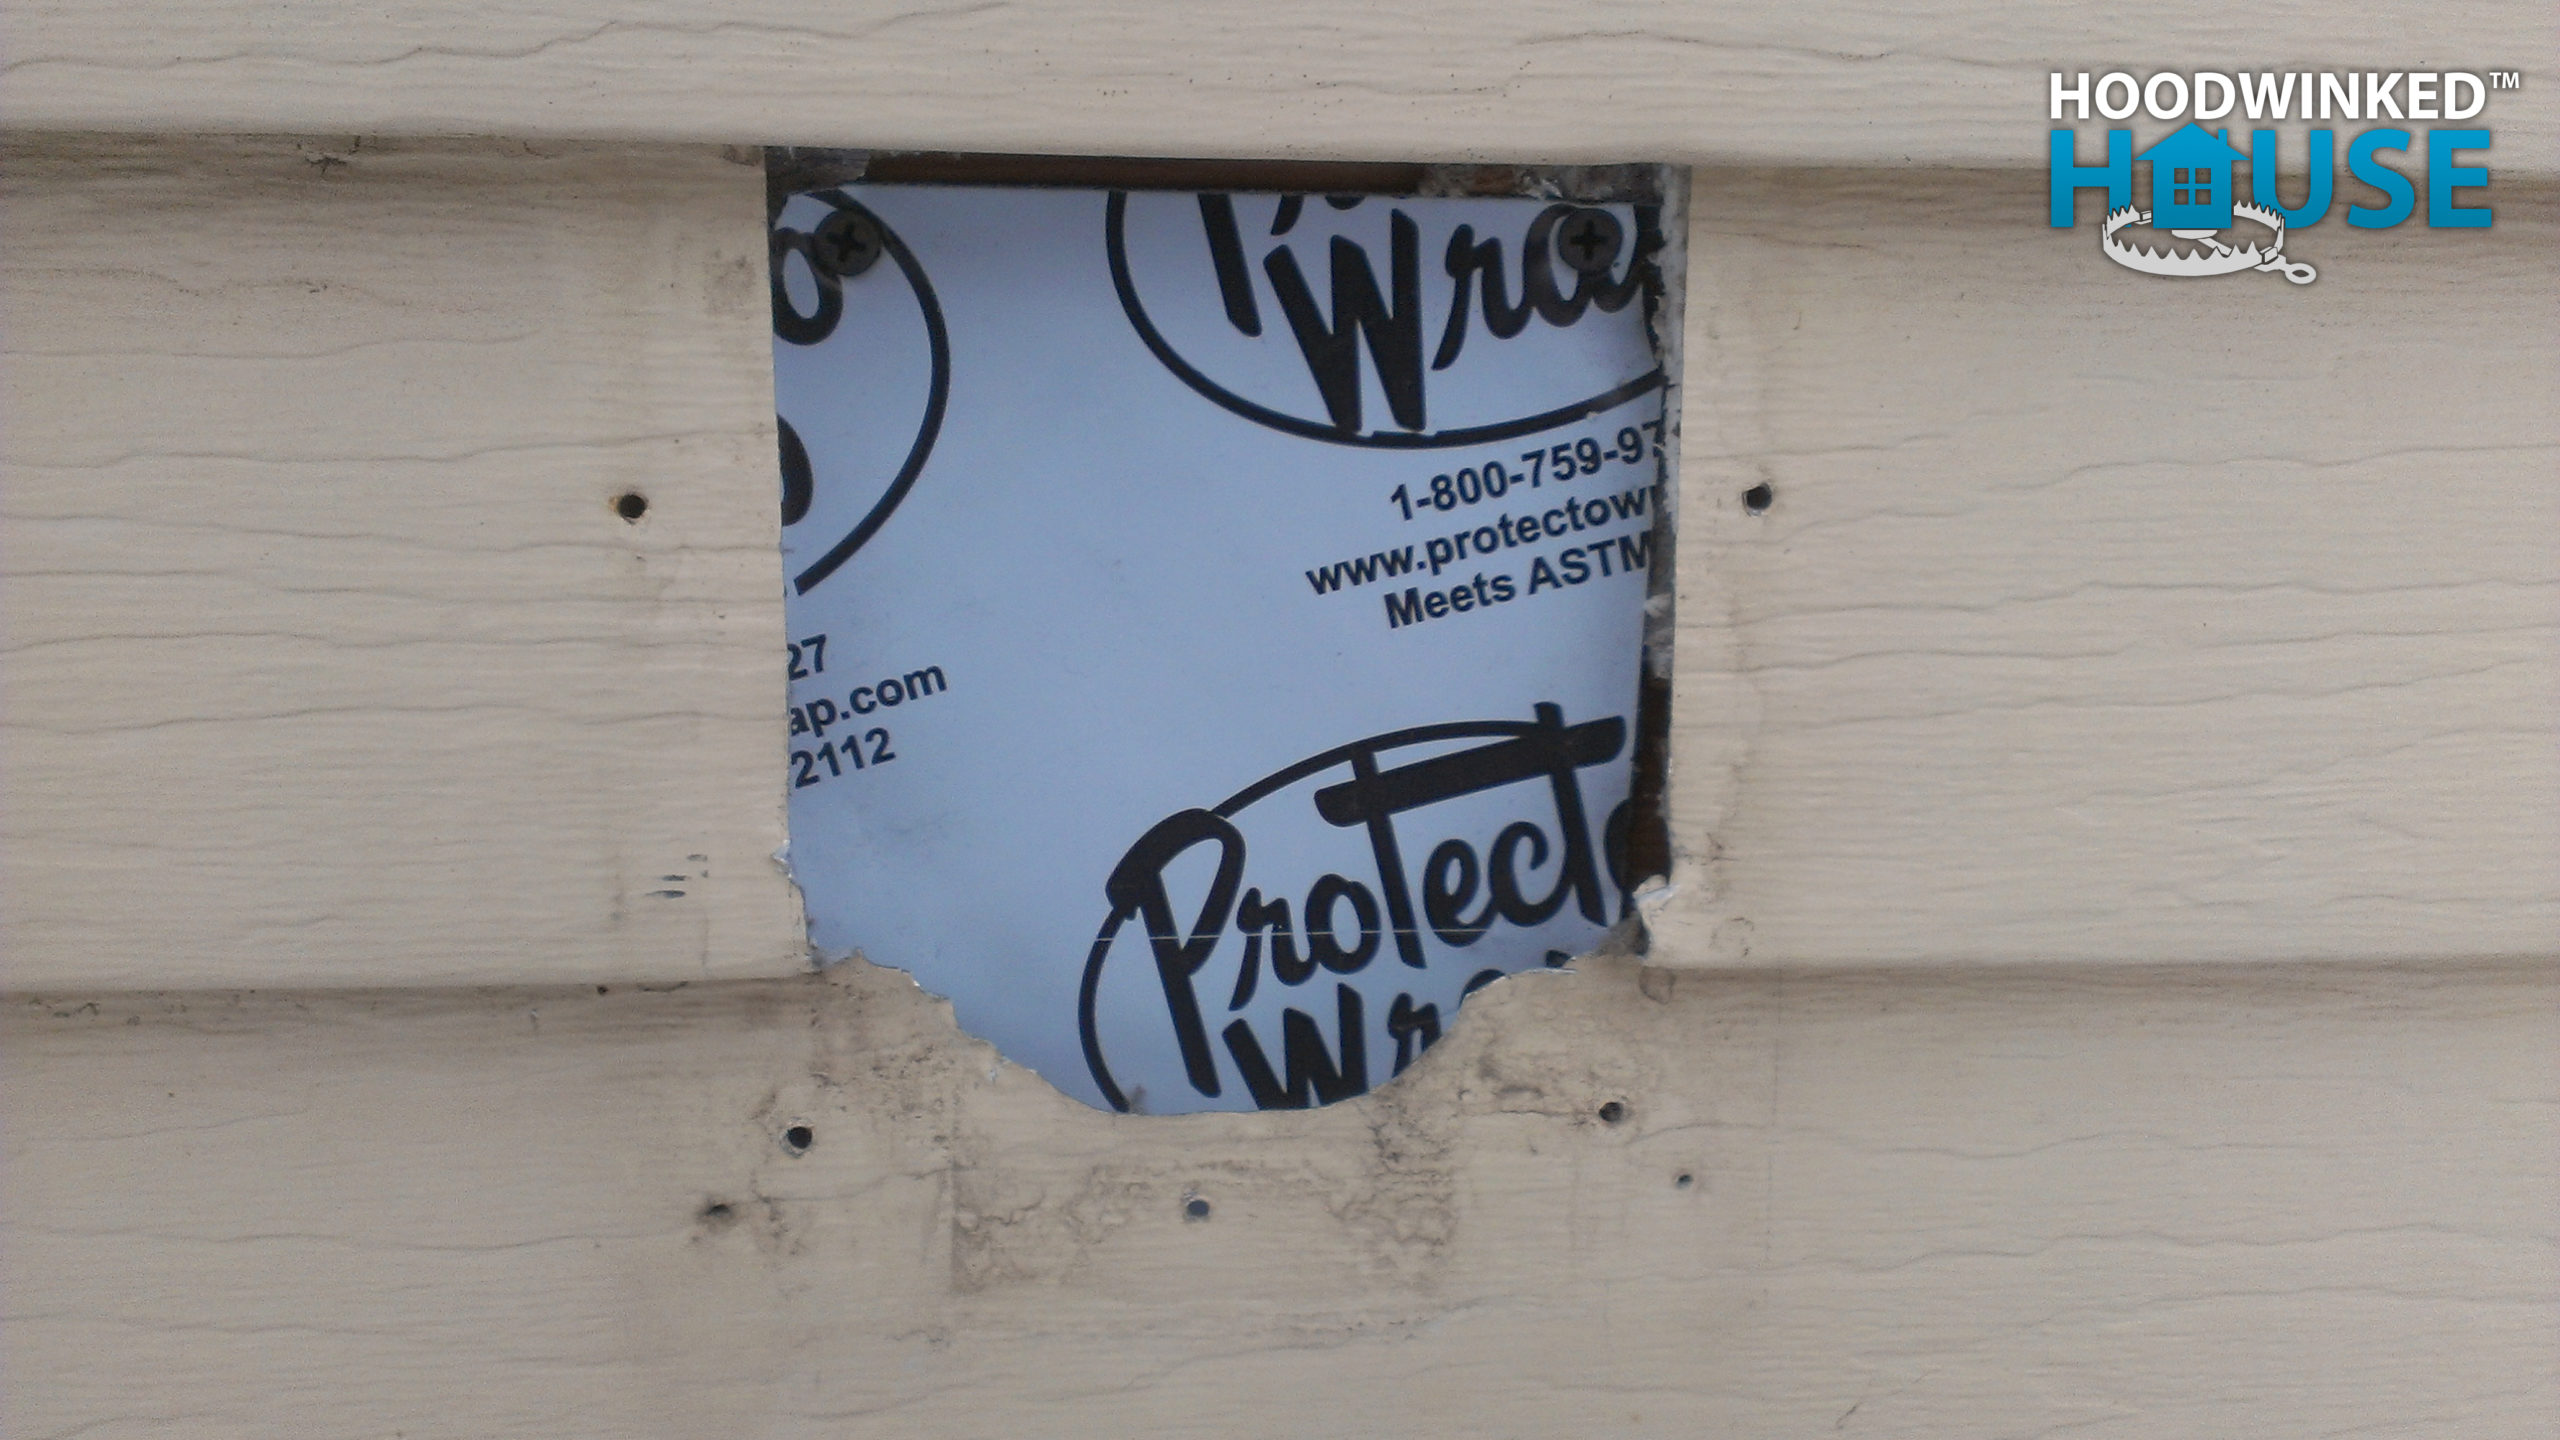 An old utility hole in a house siding is sealed up with patches of self-adhesive home wrap.